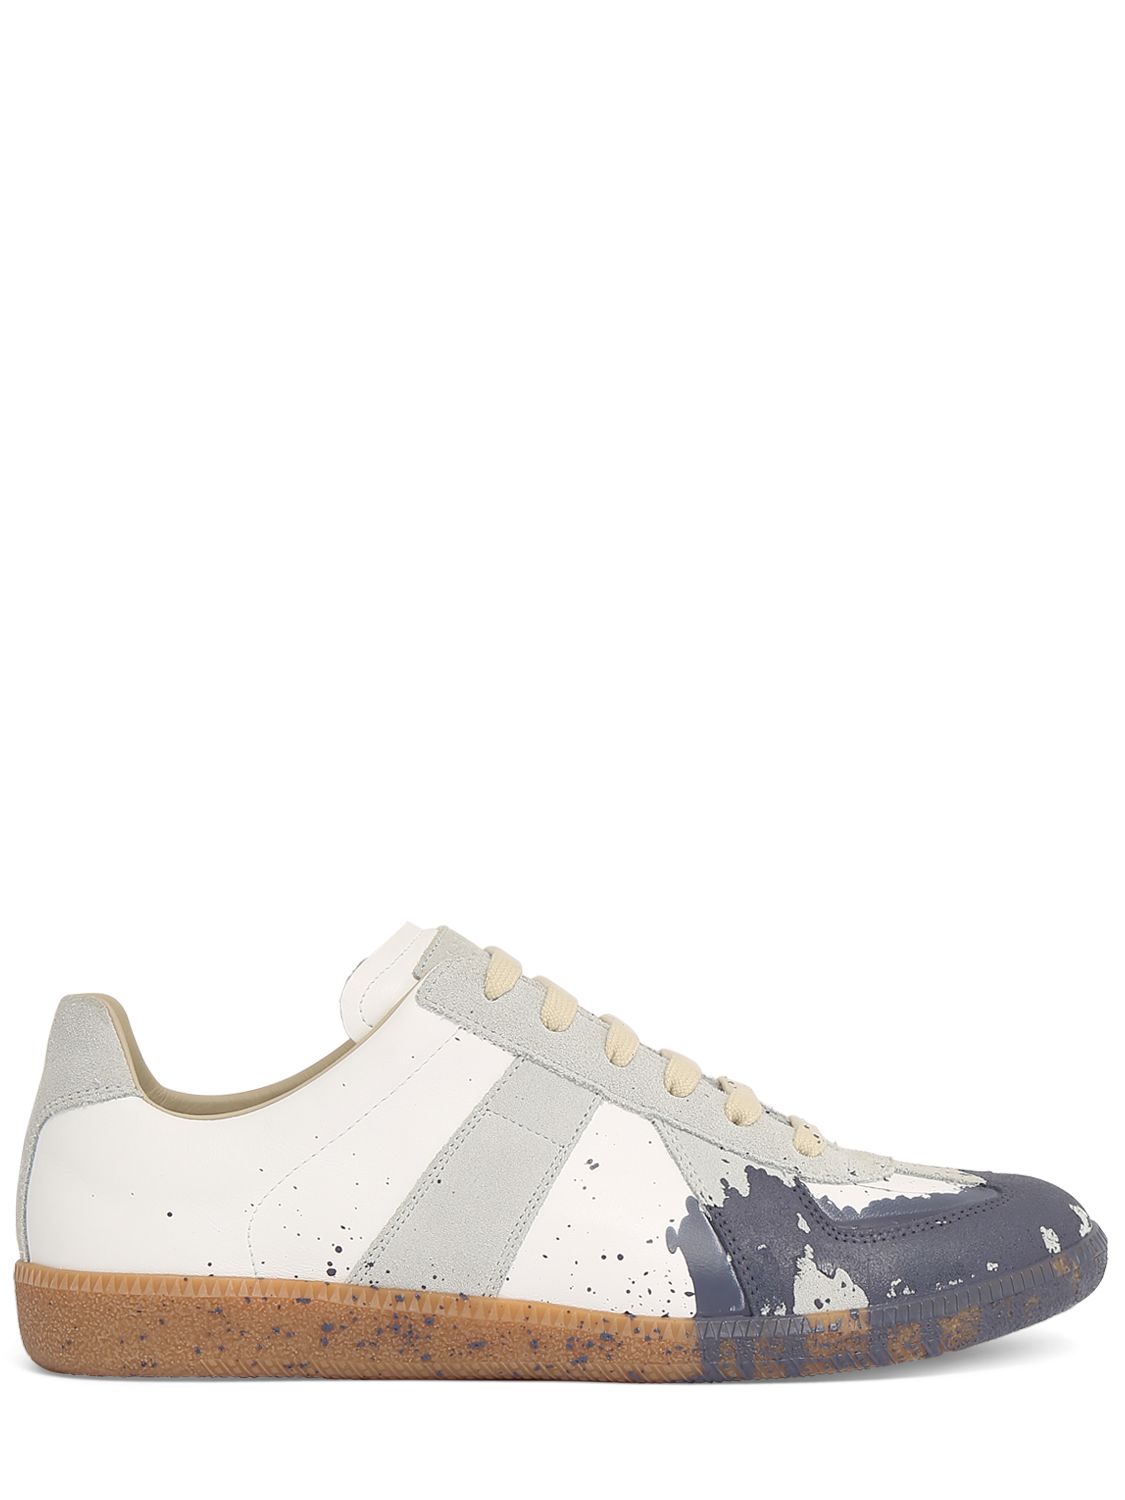 Replica Painted Leather Low Top Sneakers